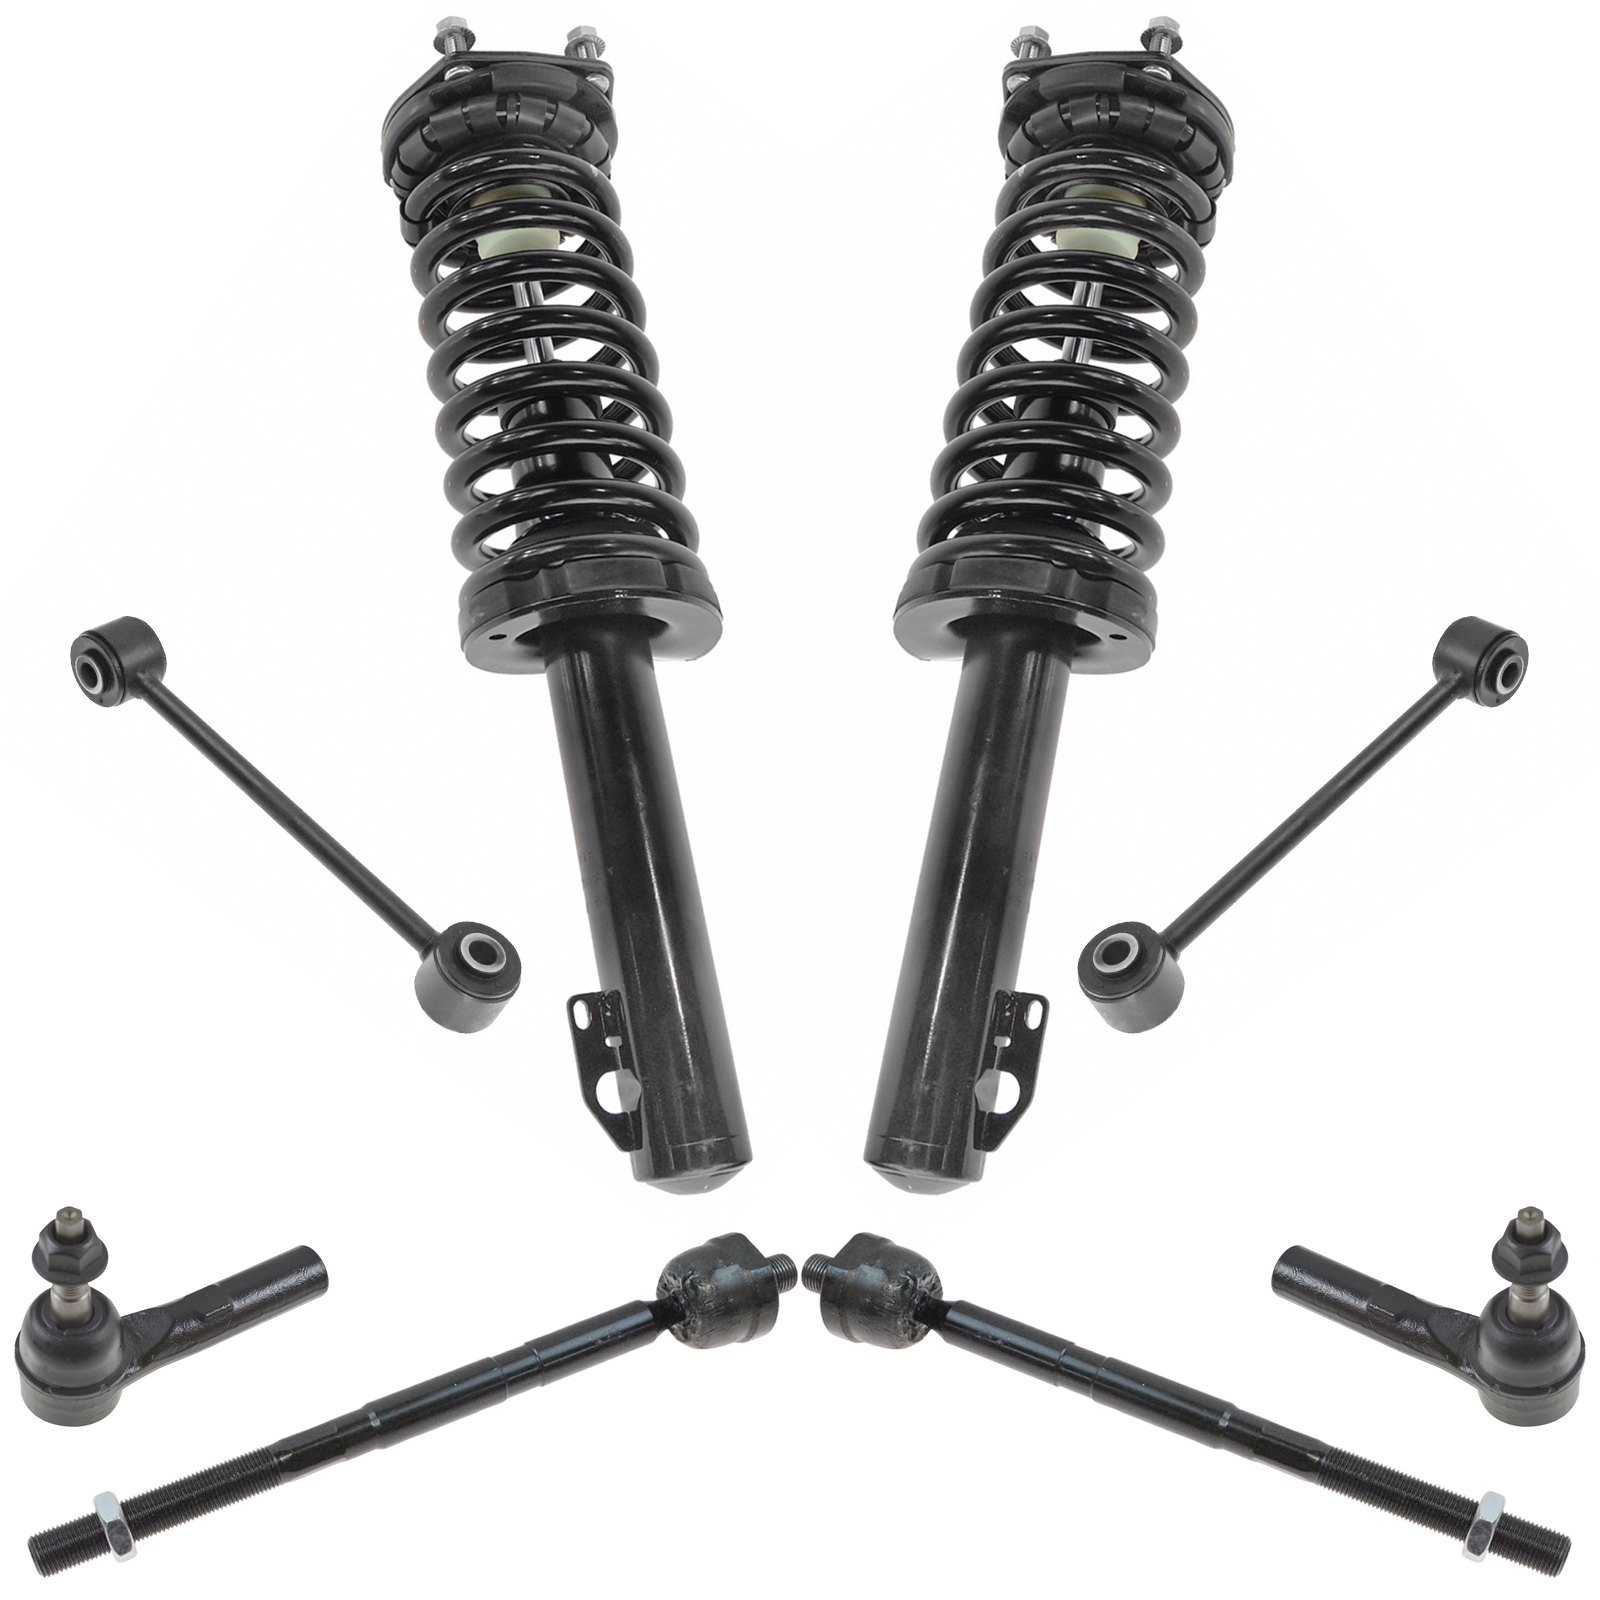 Trq 8 Piece Steering & Suspension Service Kit With Strut & Spring Assemblies For 05-10 Grand